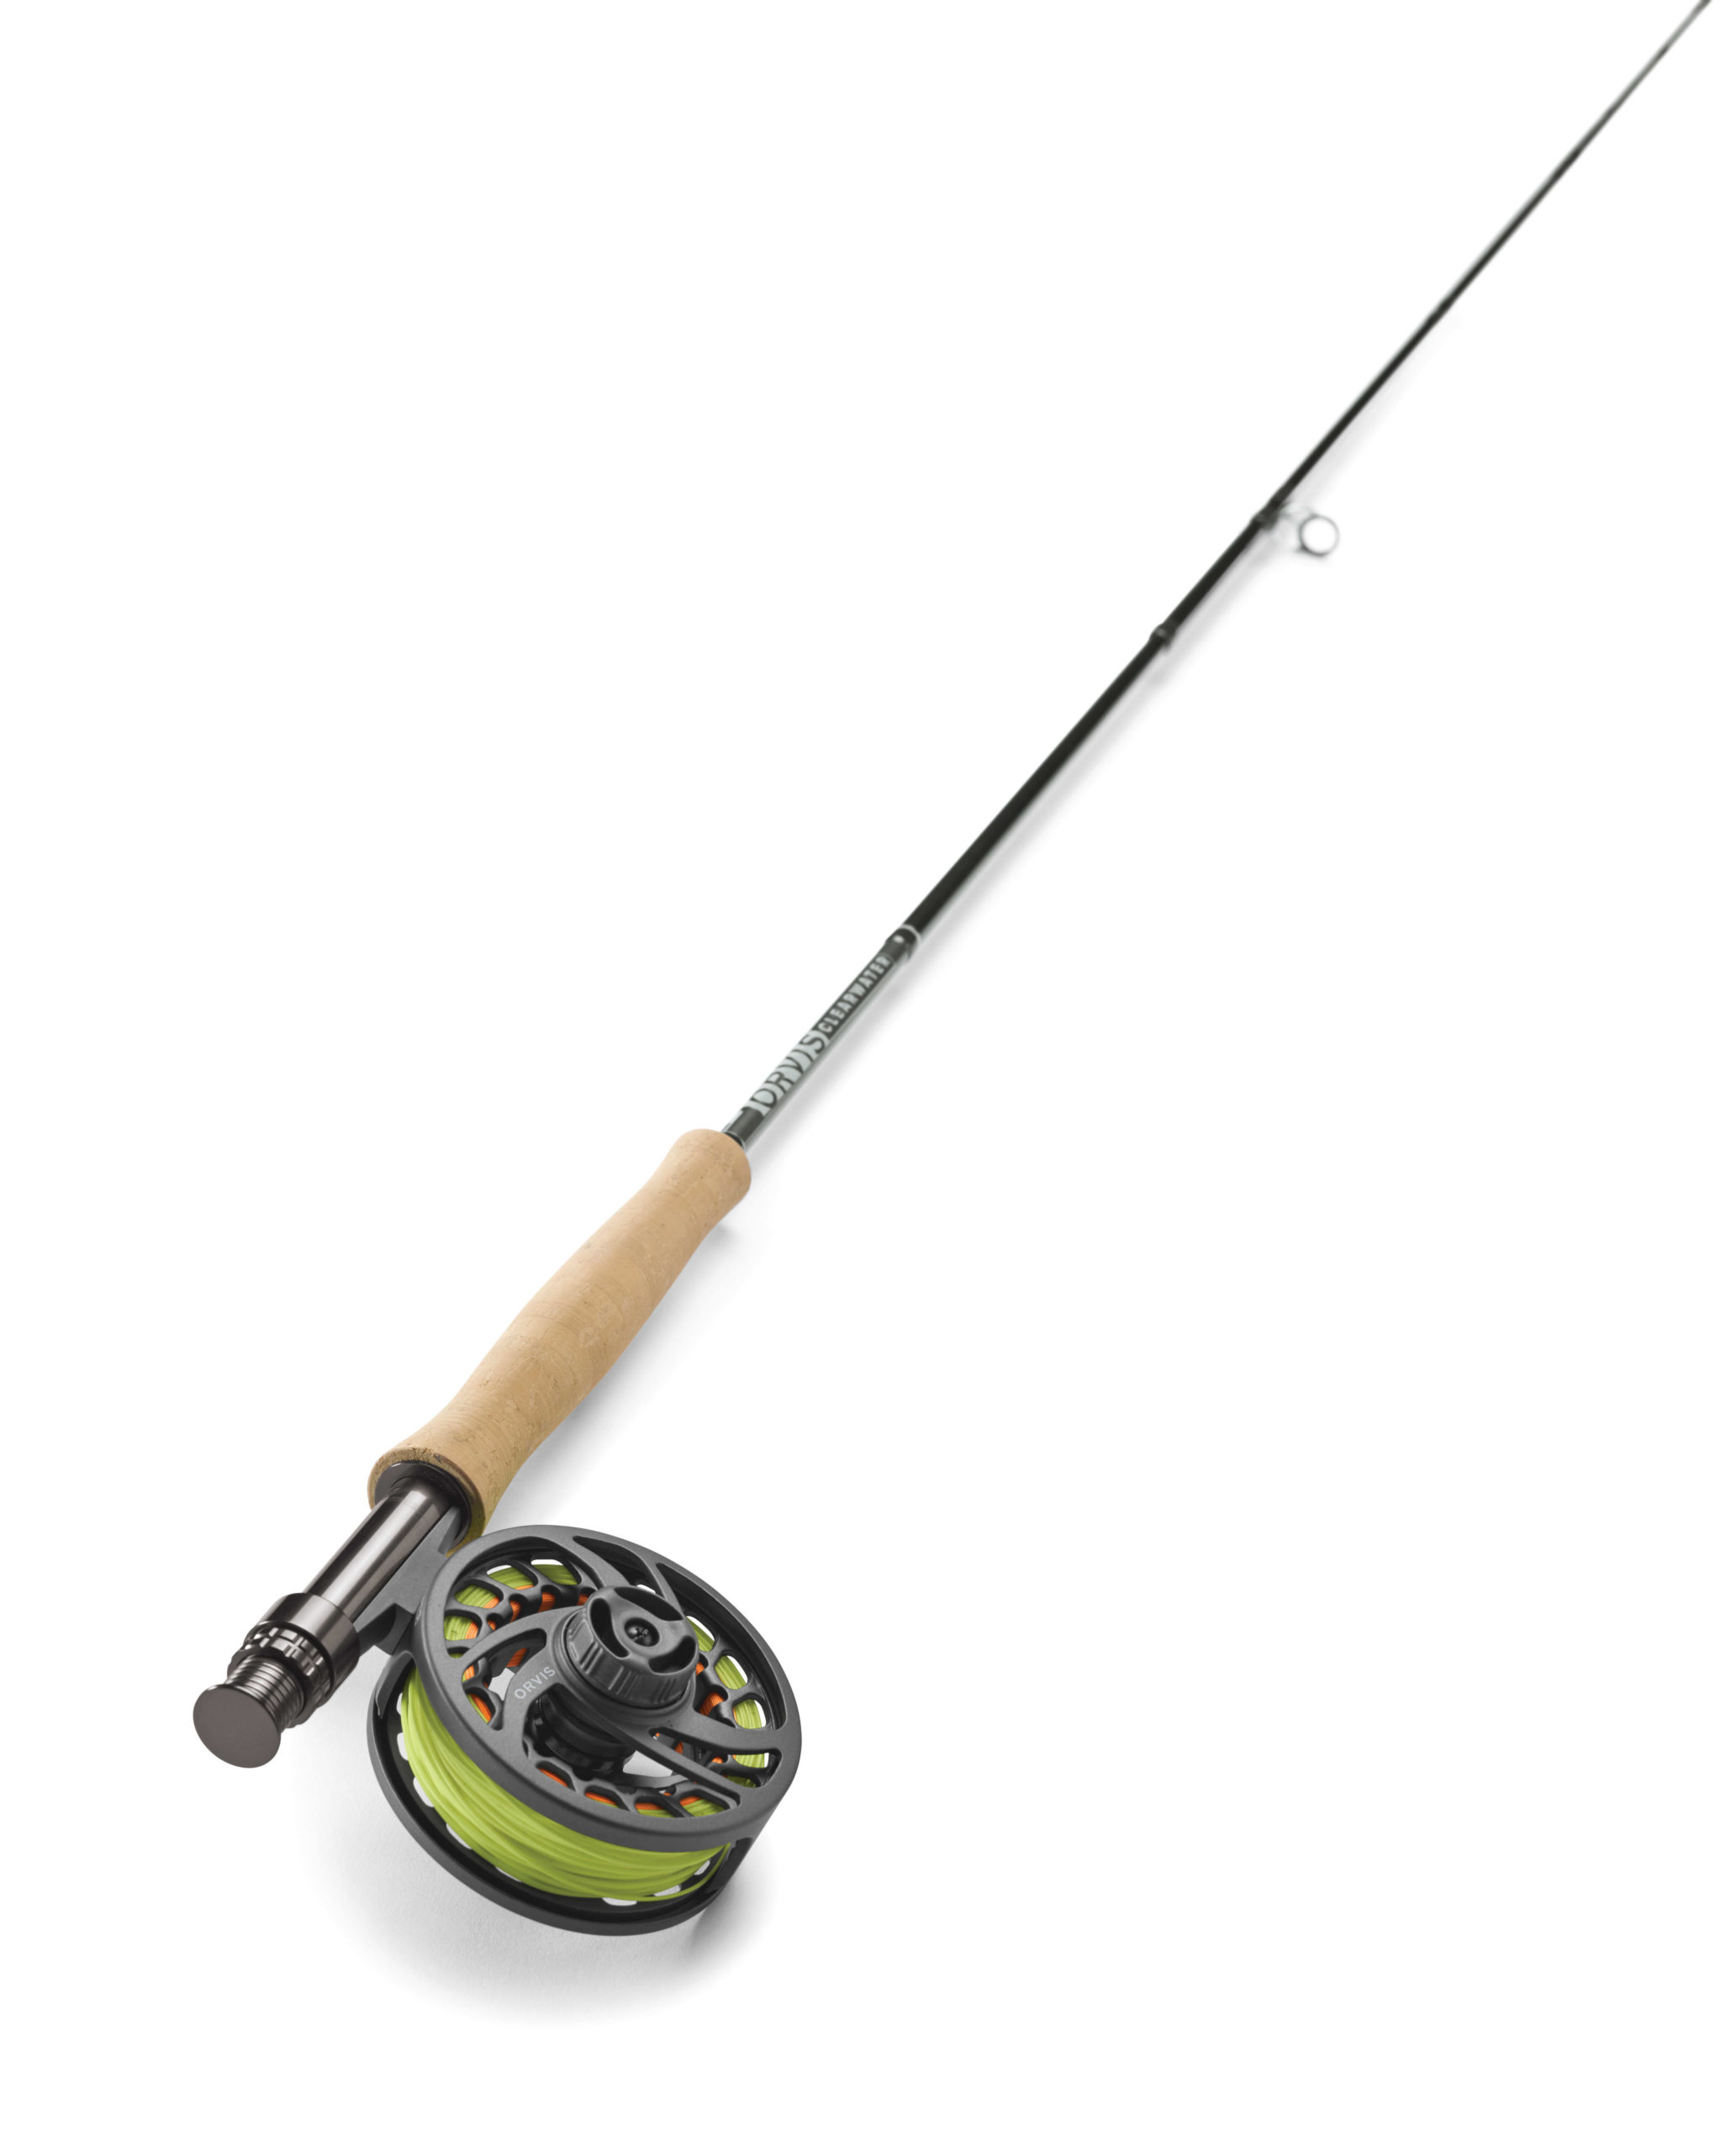 Orvis Clearwater Fly Rod and Reel Outfit - The Bent Rod